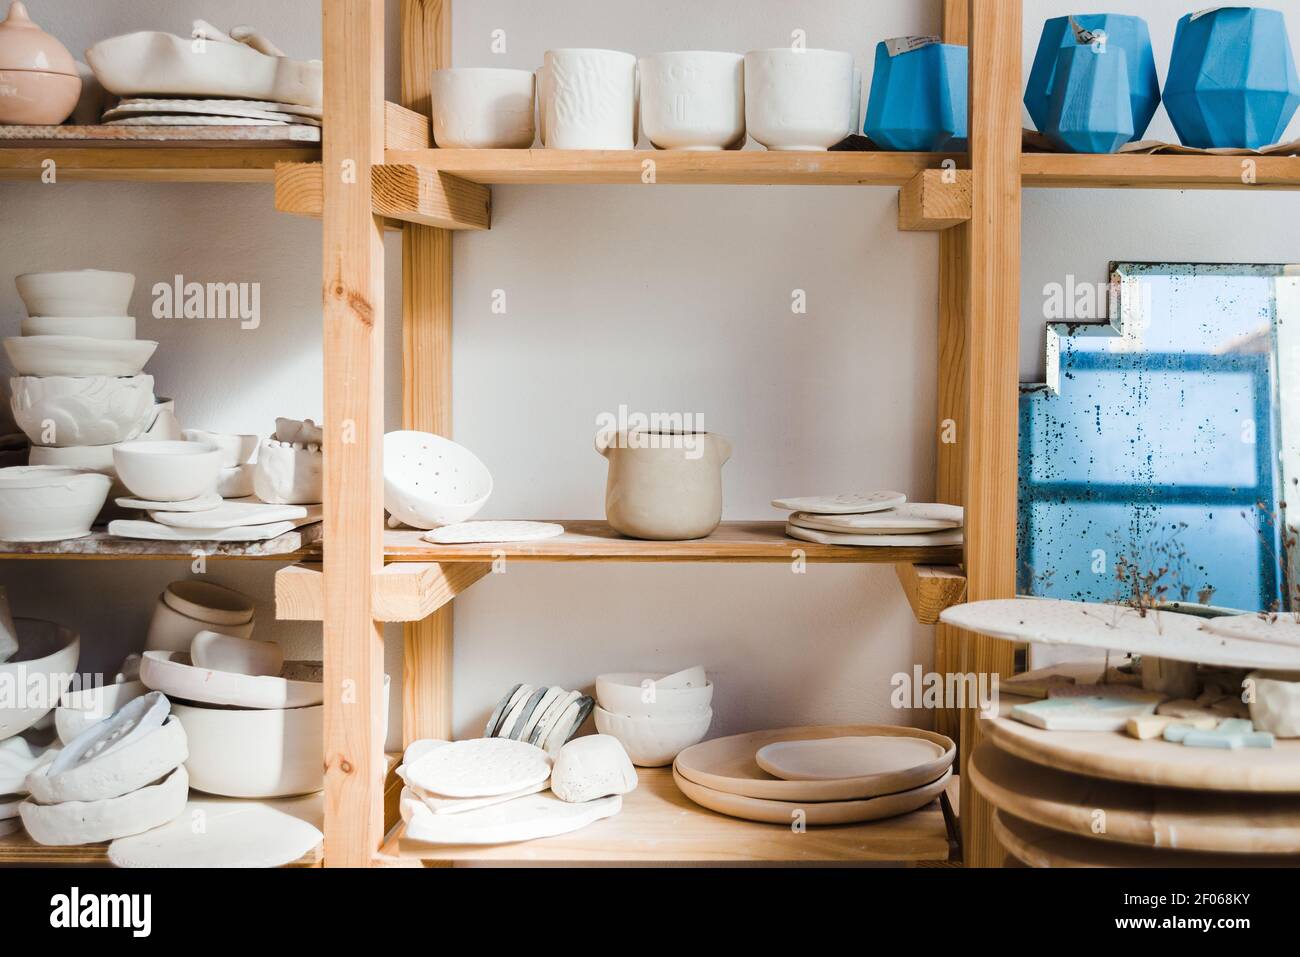 Collection of handmade ceramic bowls and vases with pots and plates with old mirror near different types of utensil standing on wooden shelves in ligh Stock Photo